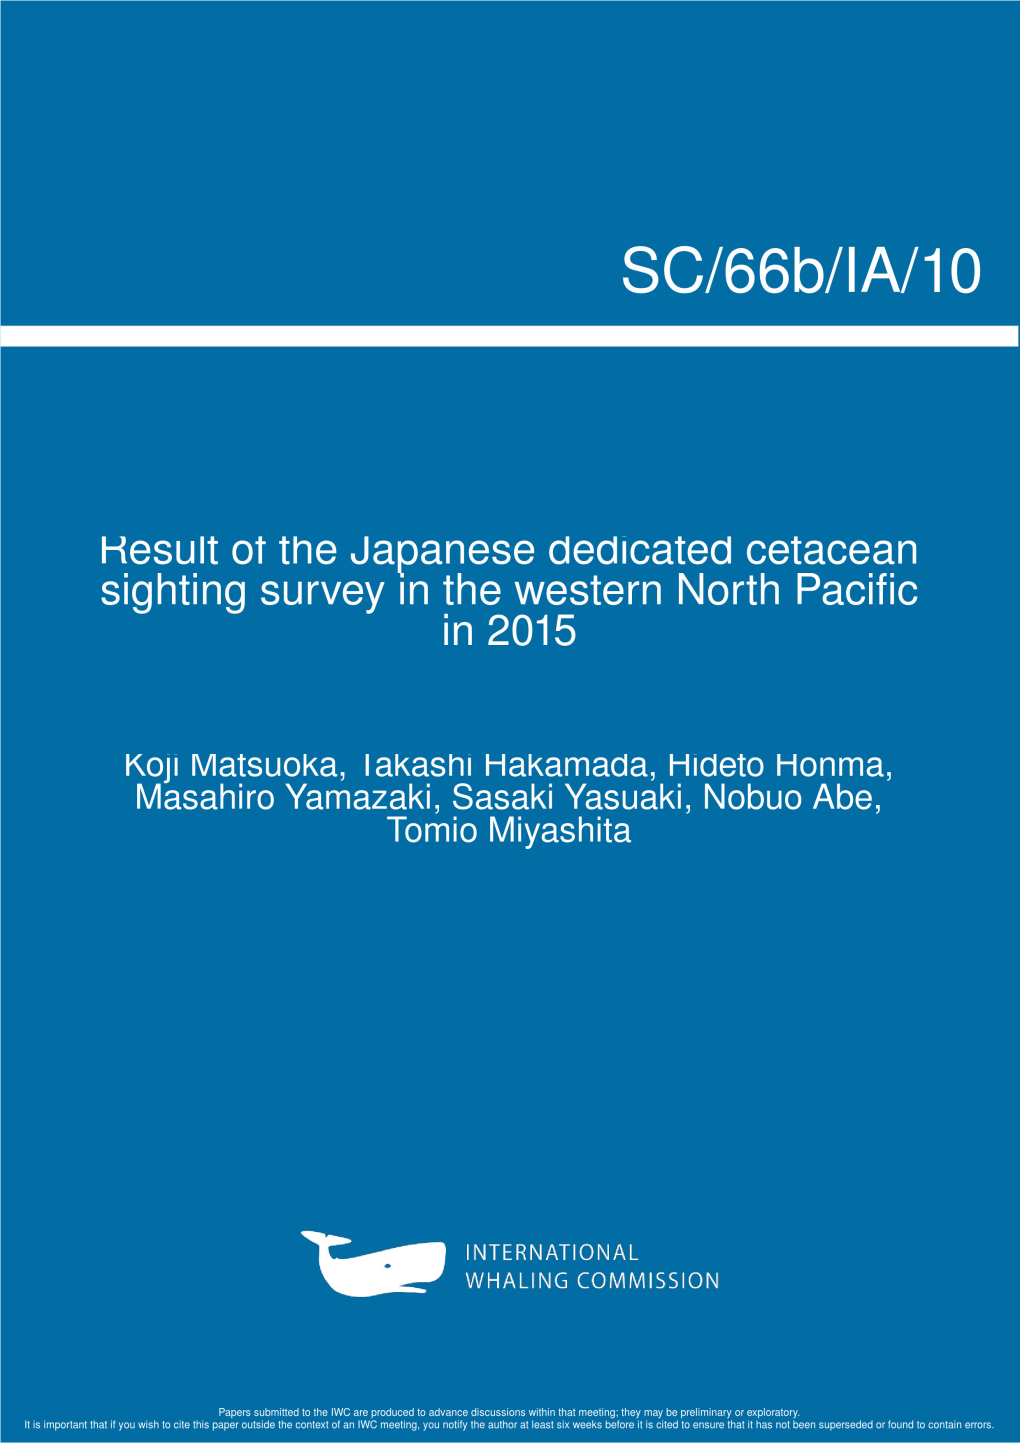 Result of the Japanese Dedicated Cetacean Sighting Survey in the Western North Pacific in 2015